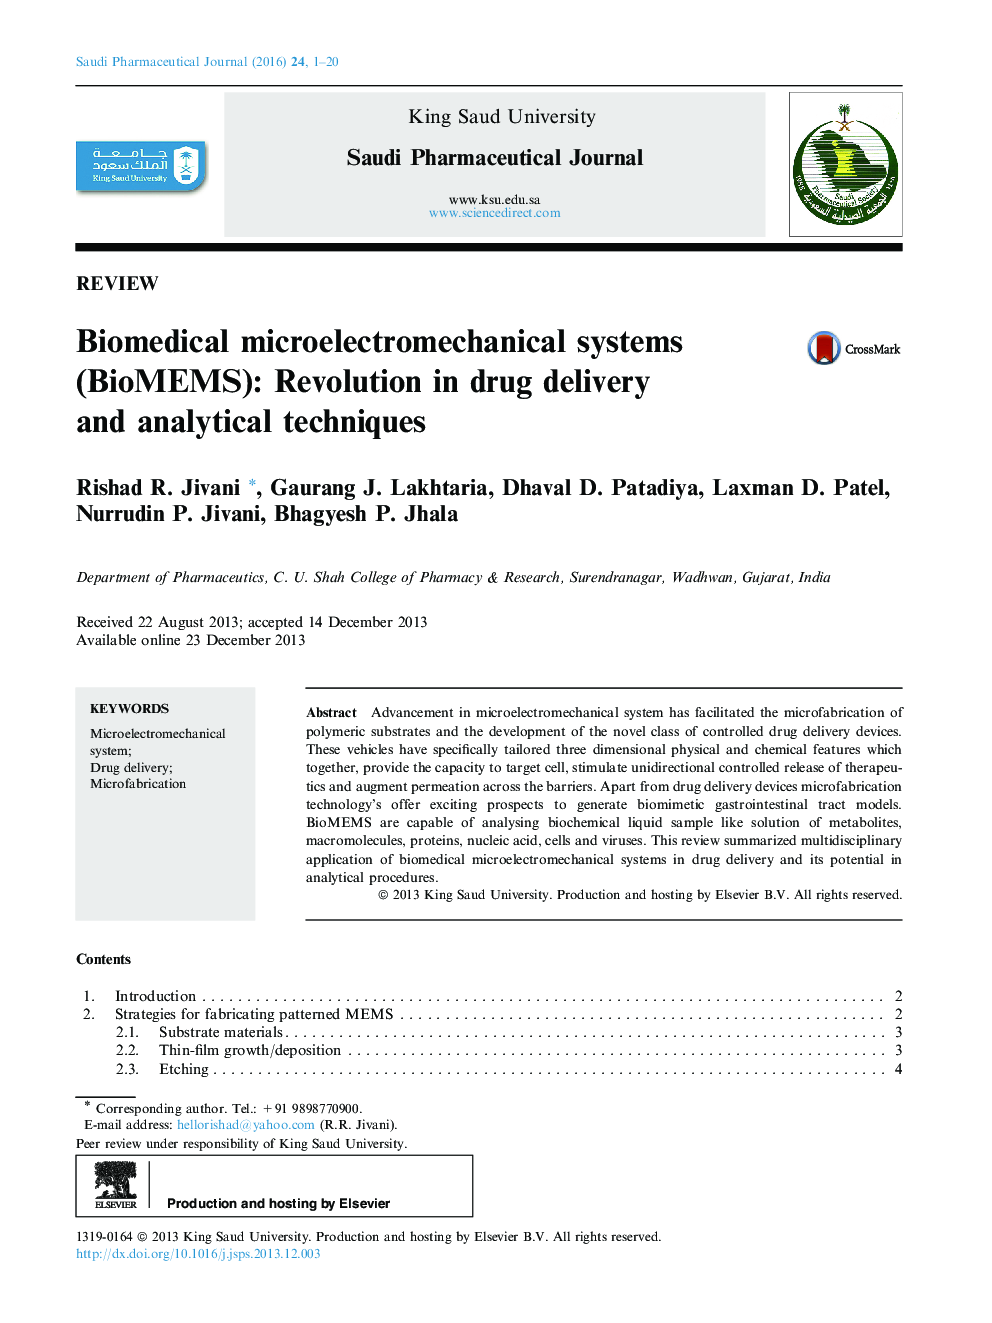 Biomedical microelectromechanical systems (BioMEMS): Revolution in drug delivery and analytical techniques 